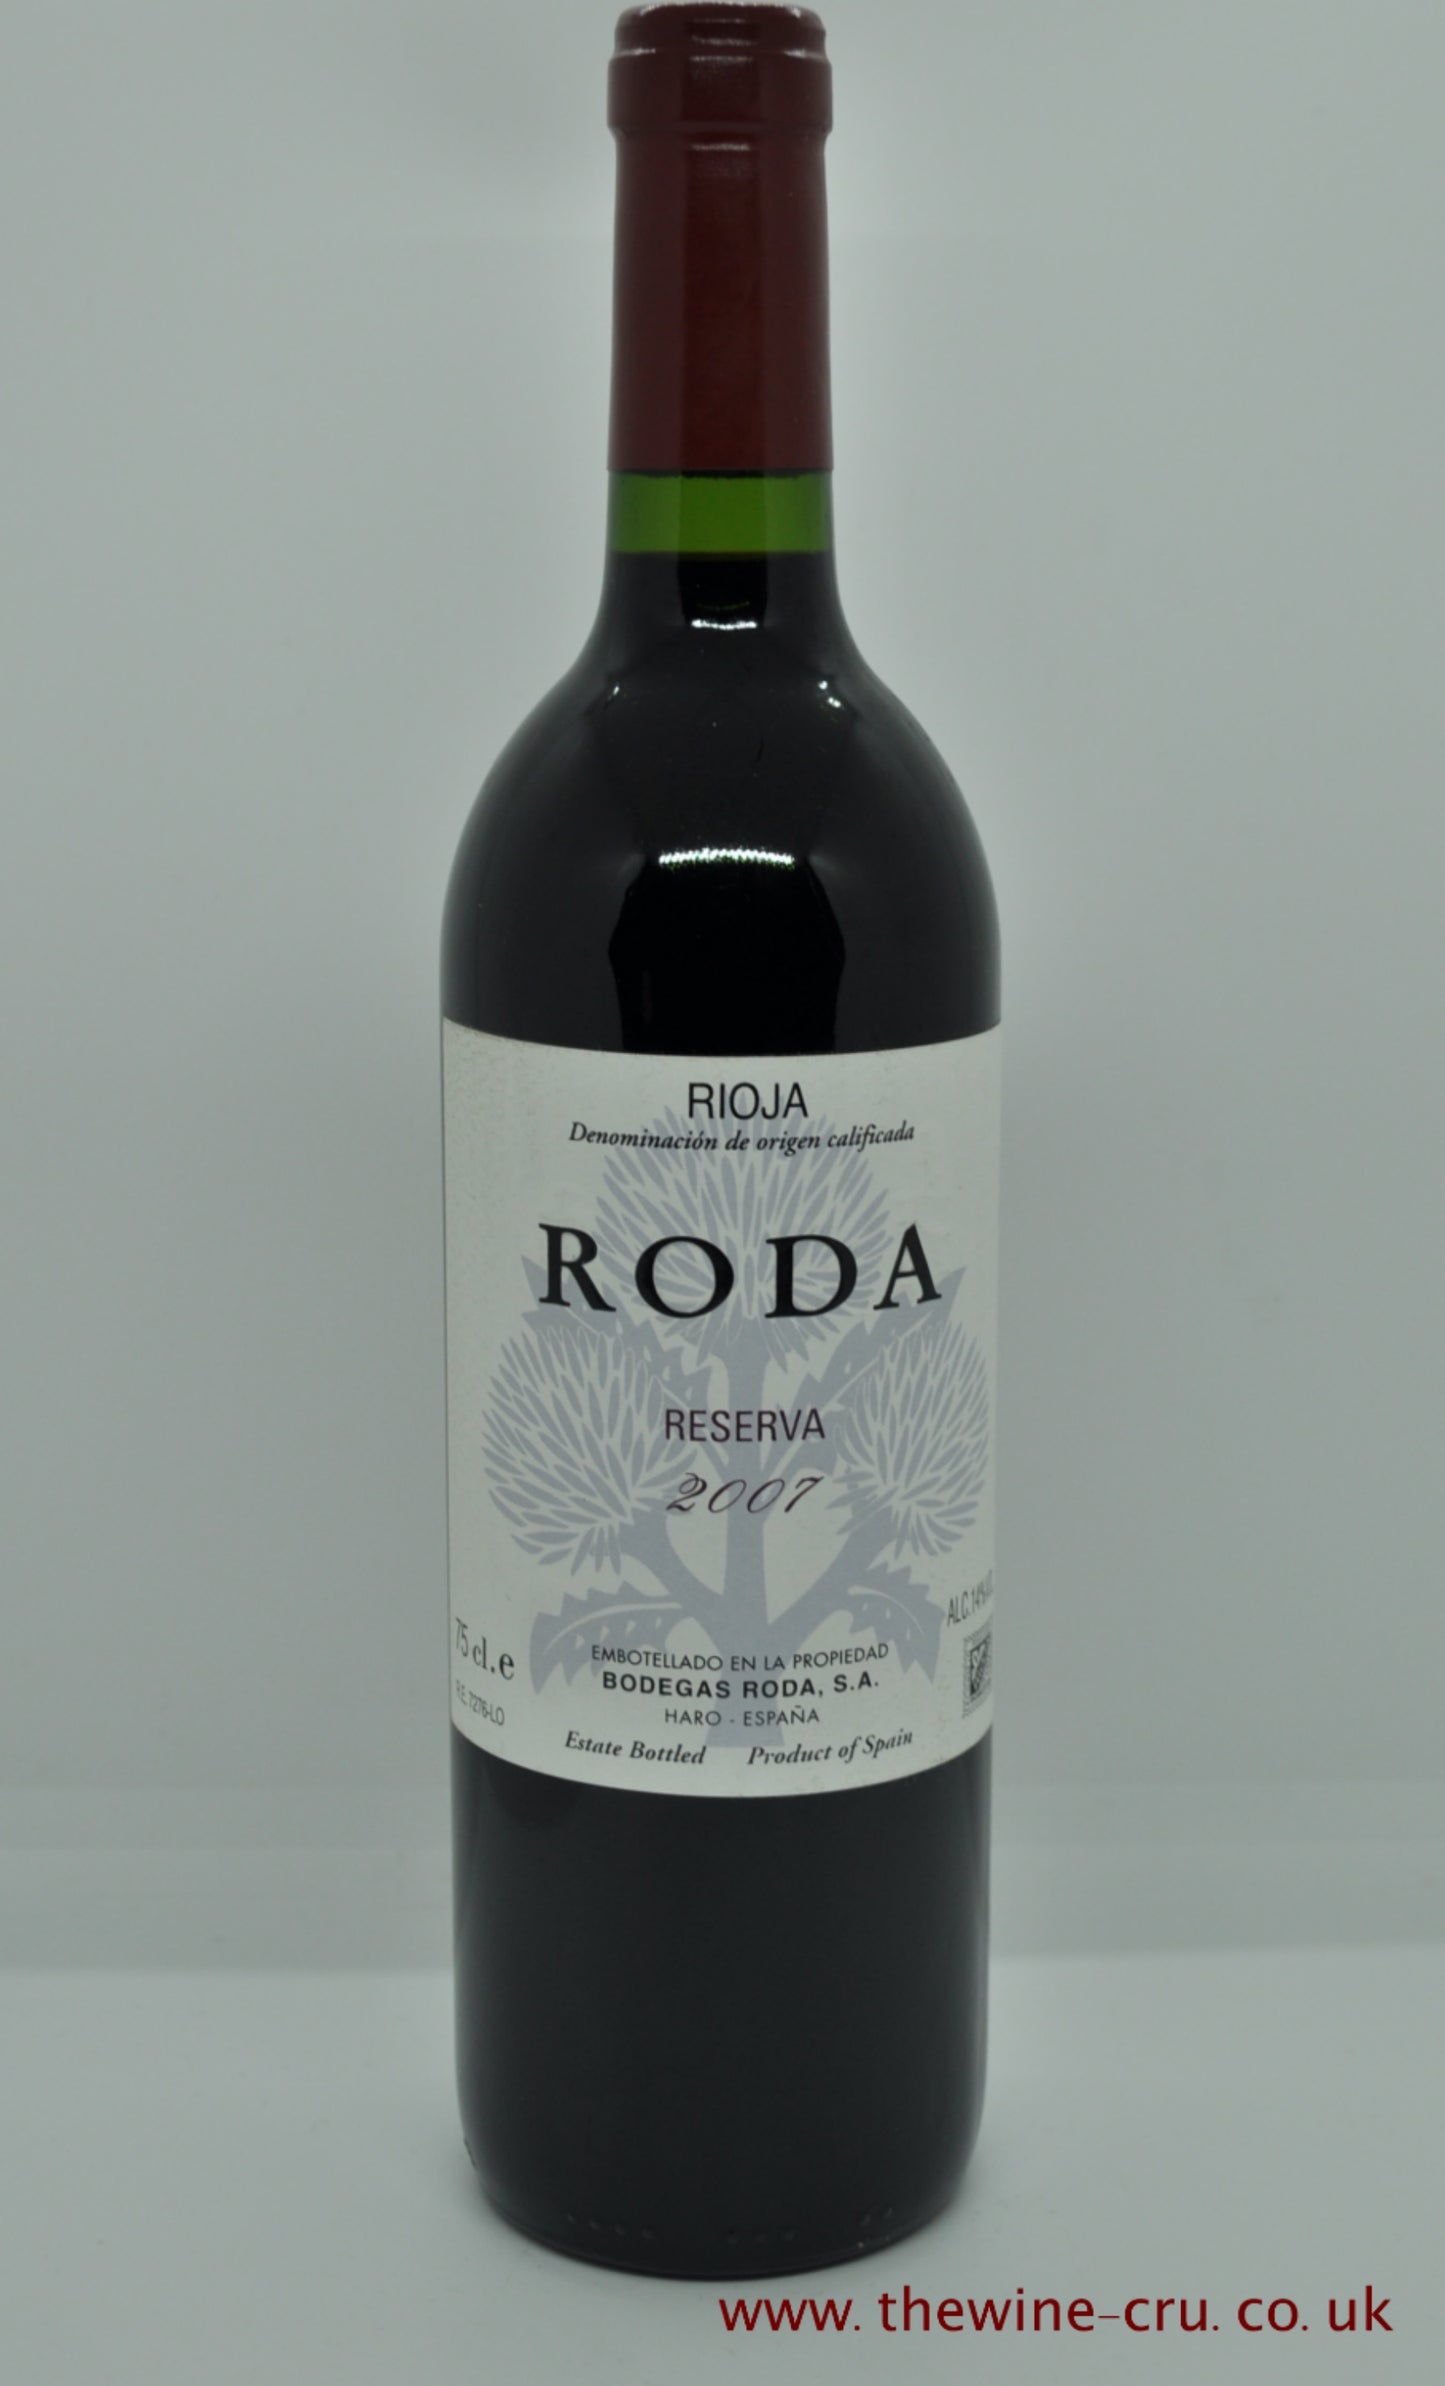 2007 vintage red wine. Roda Reserva Rioja 2007. Immediate delivery. Free local delivery. Gift wrapping available.